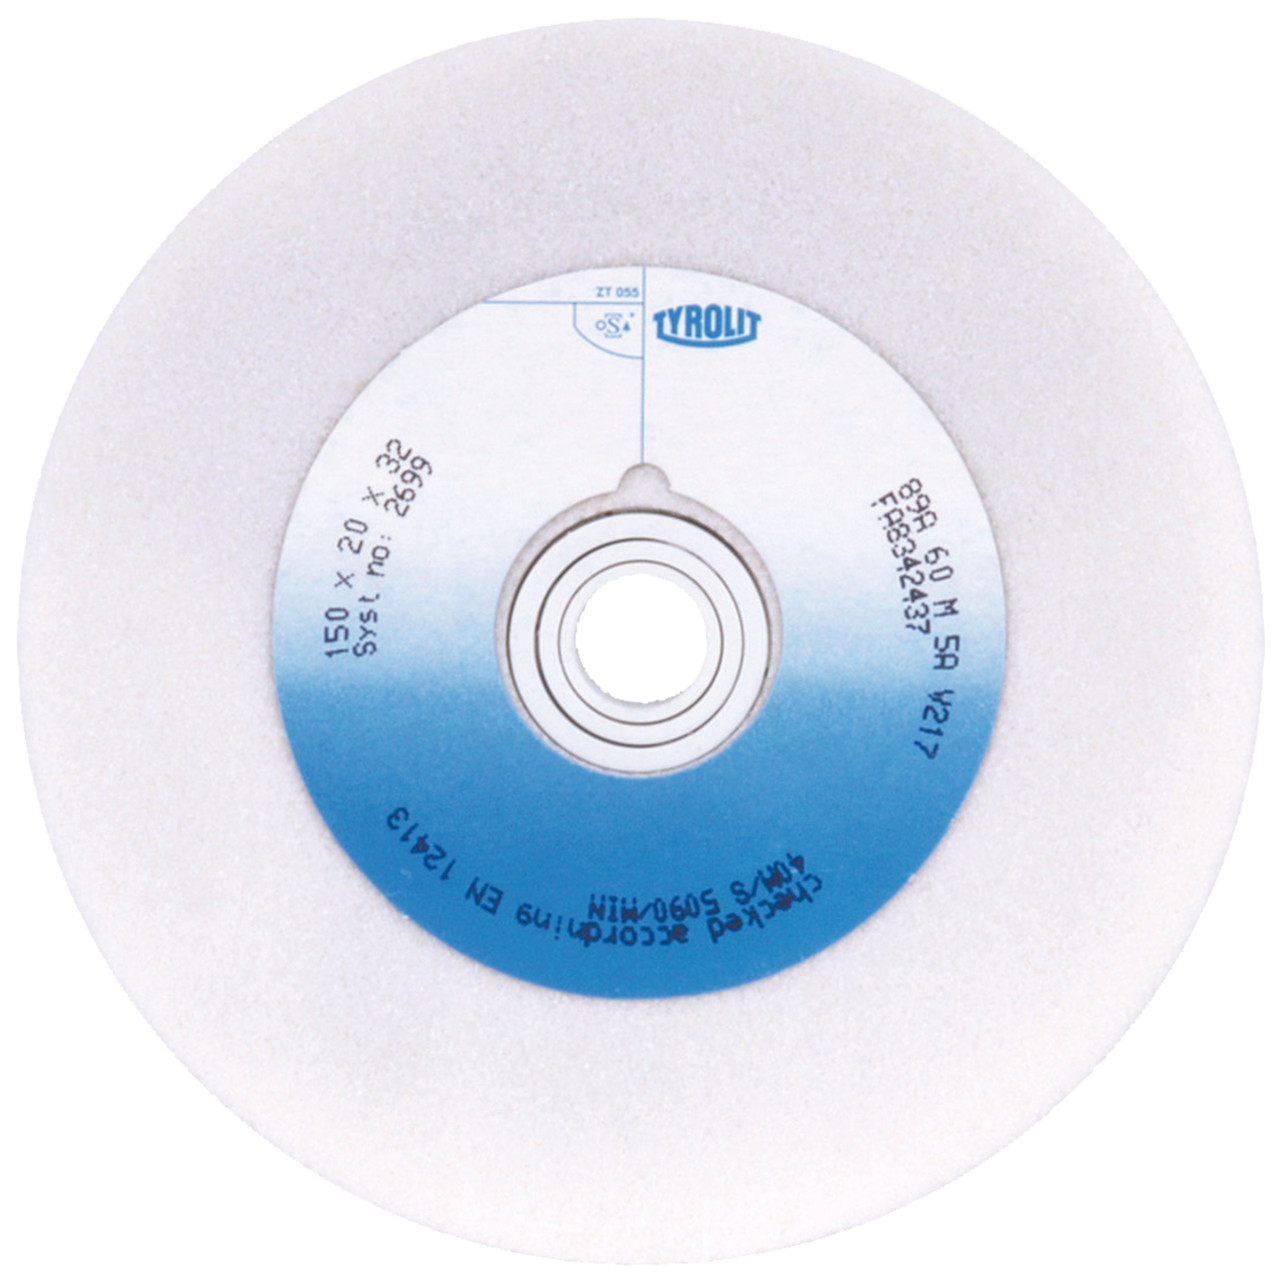 TYROLIT conventional ceramic grinding wheels DxDxH 200x25x32 For high-alloy steels and HSS, shape: 1, Art. 3220